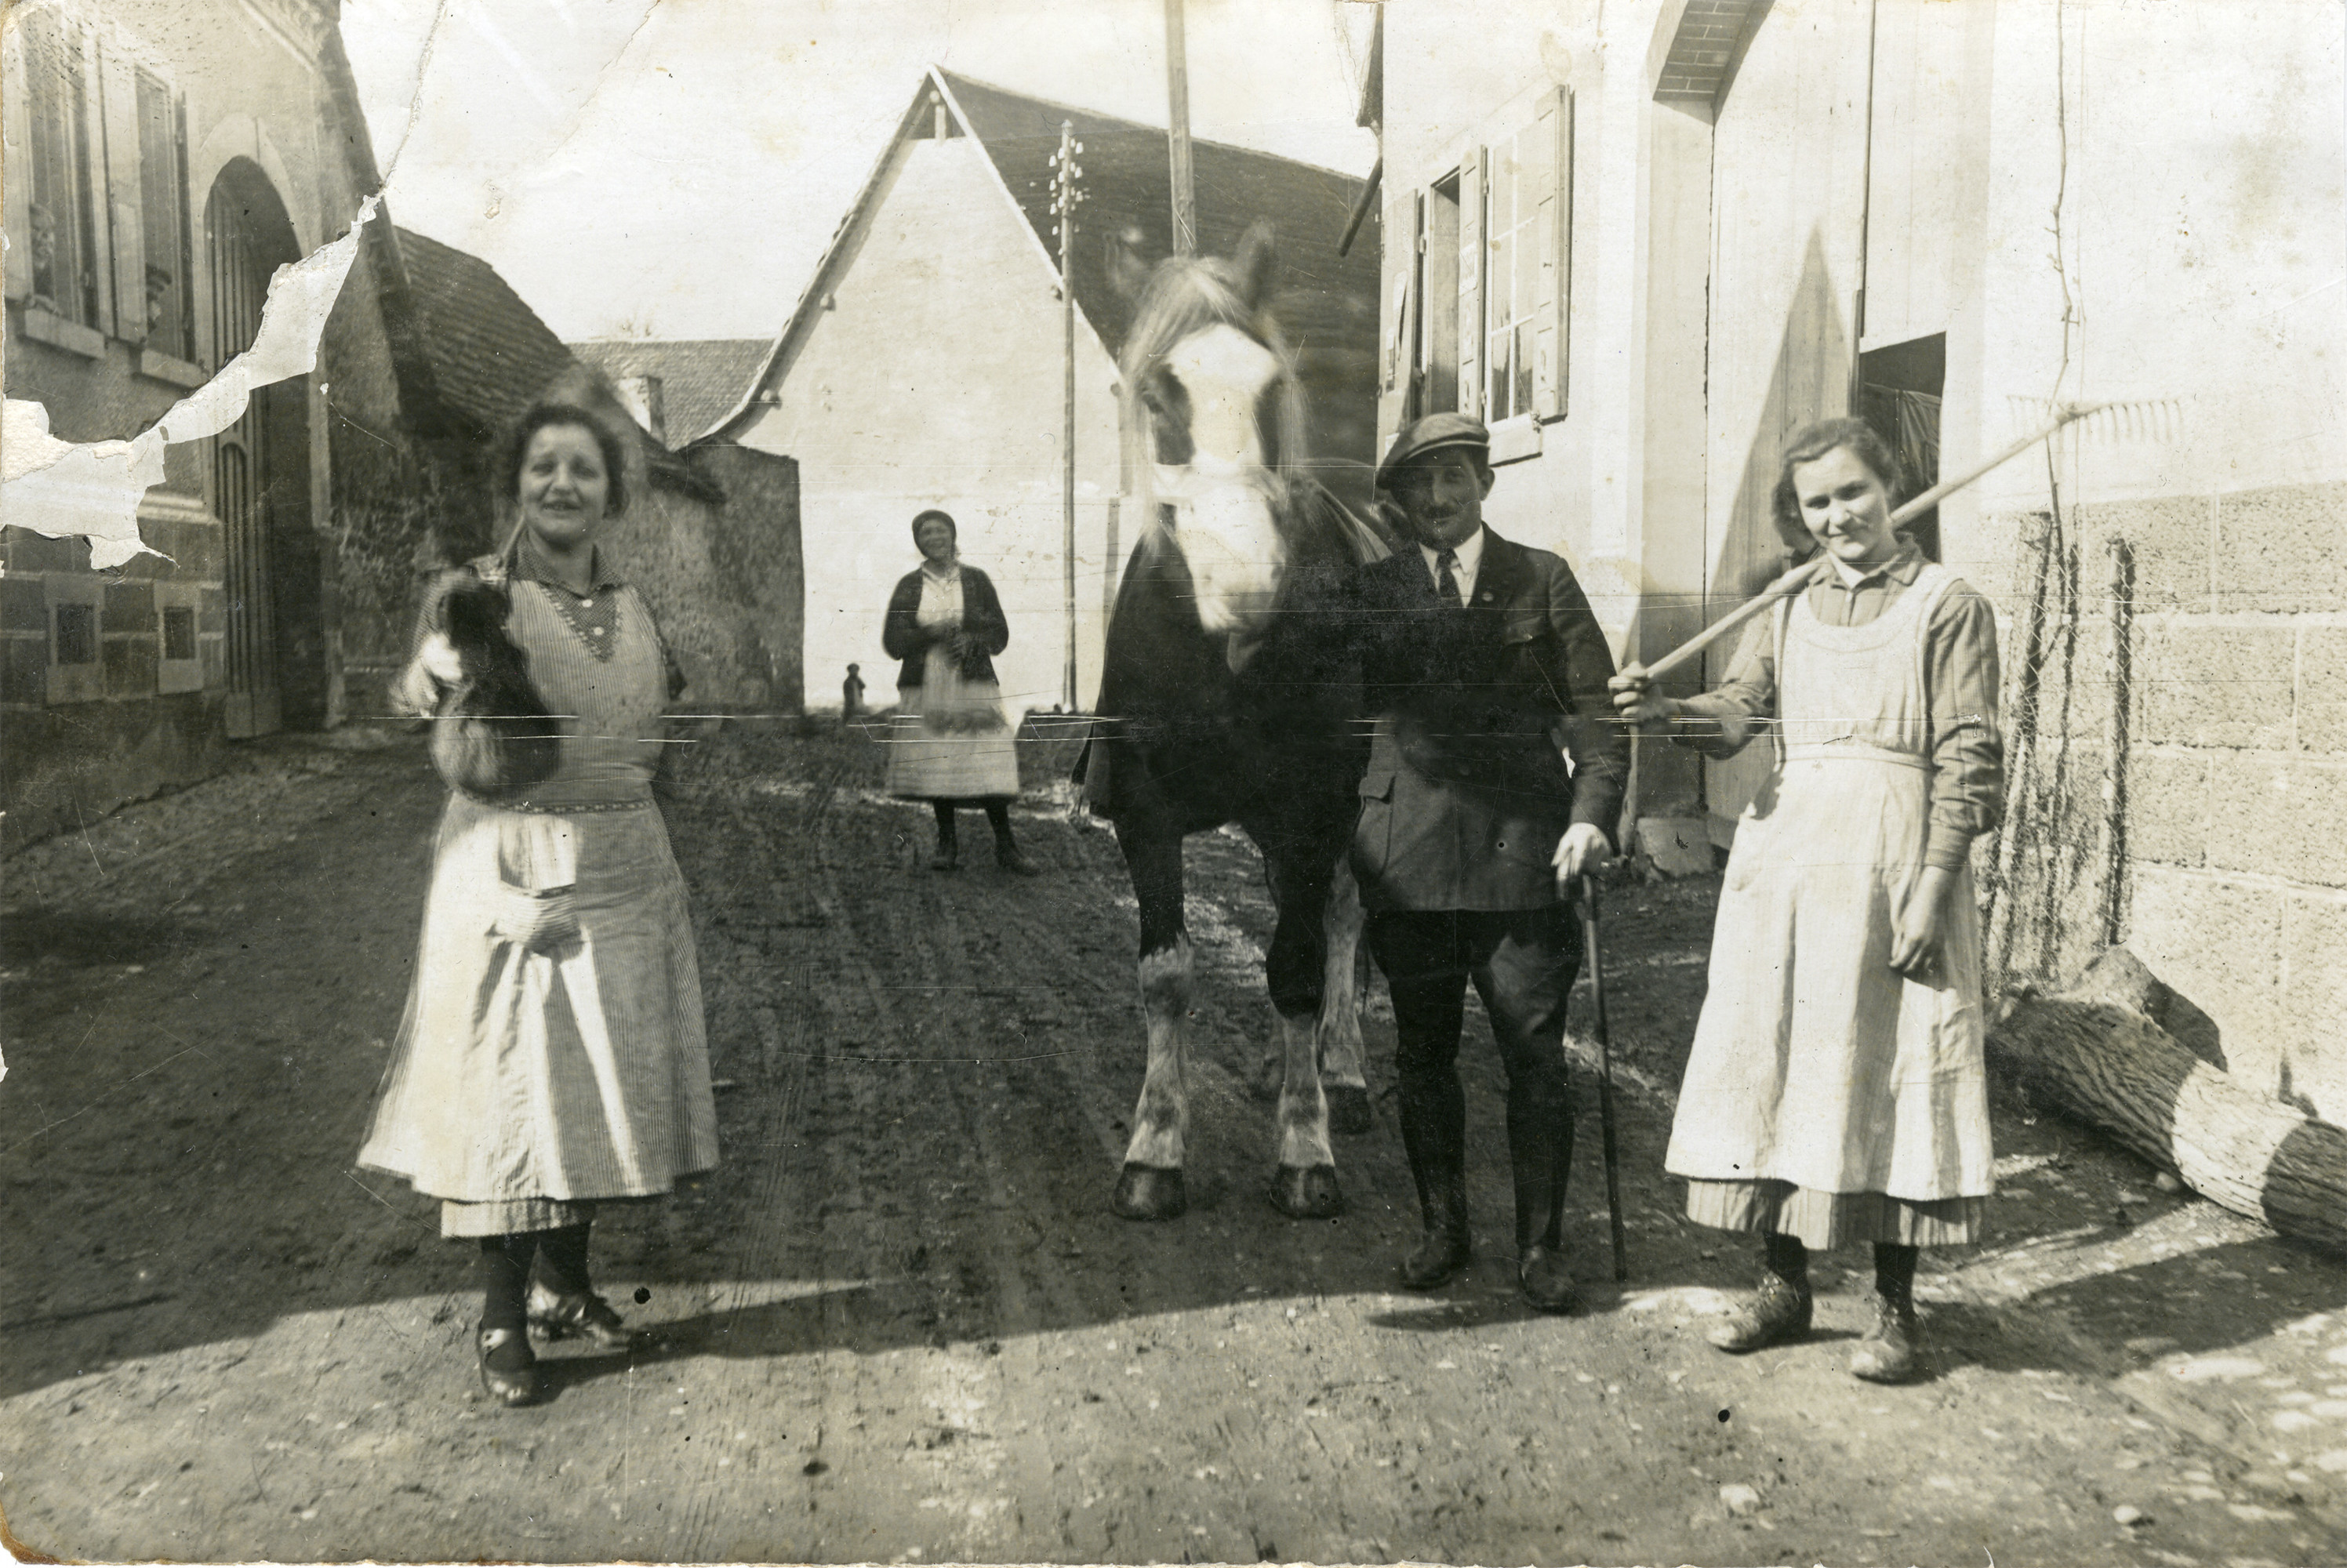 A German Jewish horsetrader holds his horse on the streets of a German town (probably Ihringen), flanked by two women.

Pictured is Daniel Judas (center), Frau Luise (nee Gibson) Jenne (right) and Frau H. Von Laedele (right).  Daniel was killed in a motorcycle accident.